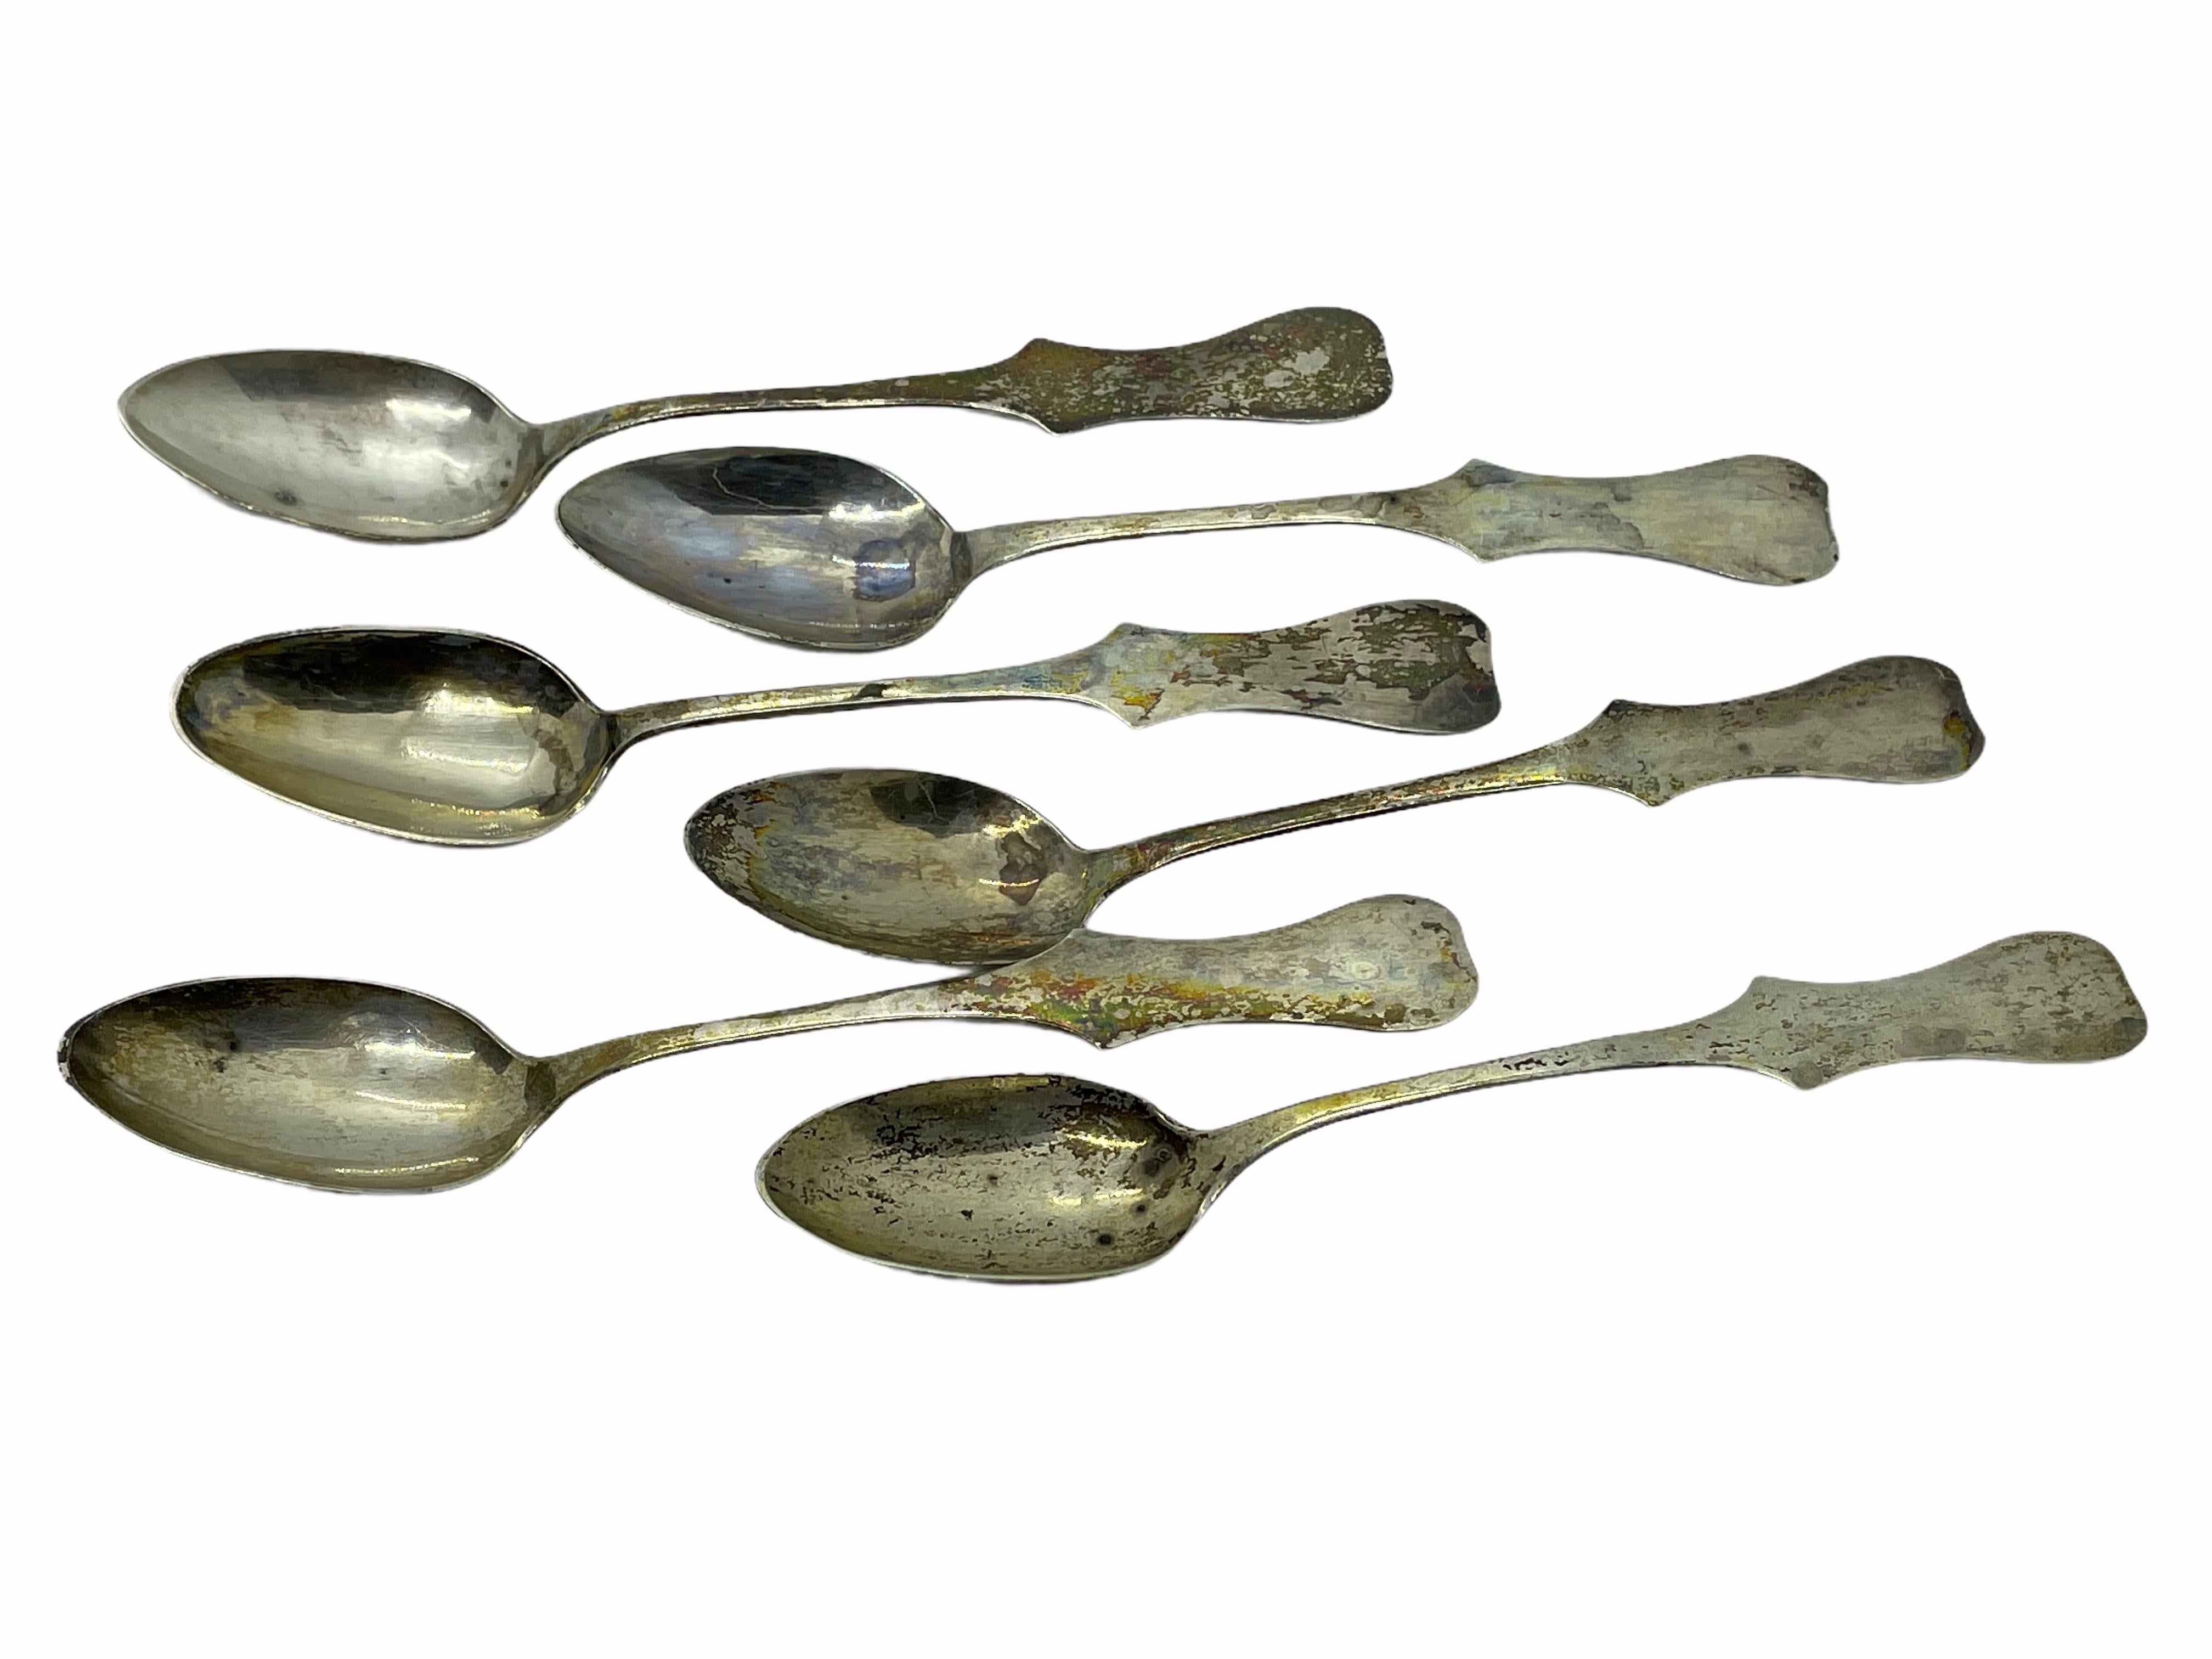 This is a 19th C. 1820s Nuremberg, Germany set of six spoons, in a old case (not original, but looks great for the Spoons).
All spoons are Hallmarked silver 812.5 (silver 13 lot), the master mark and Nuernberg.
The spoons weighs about 53 grams or